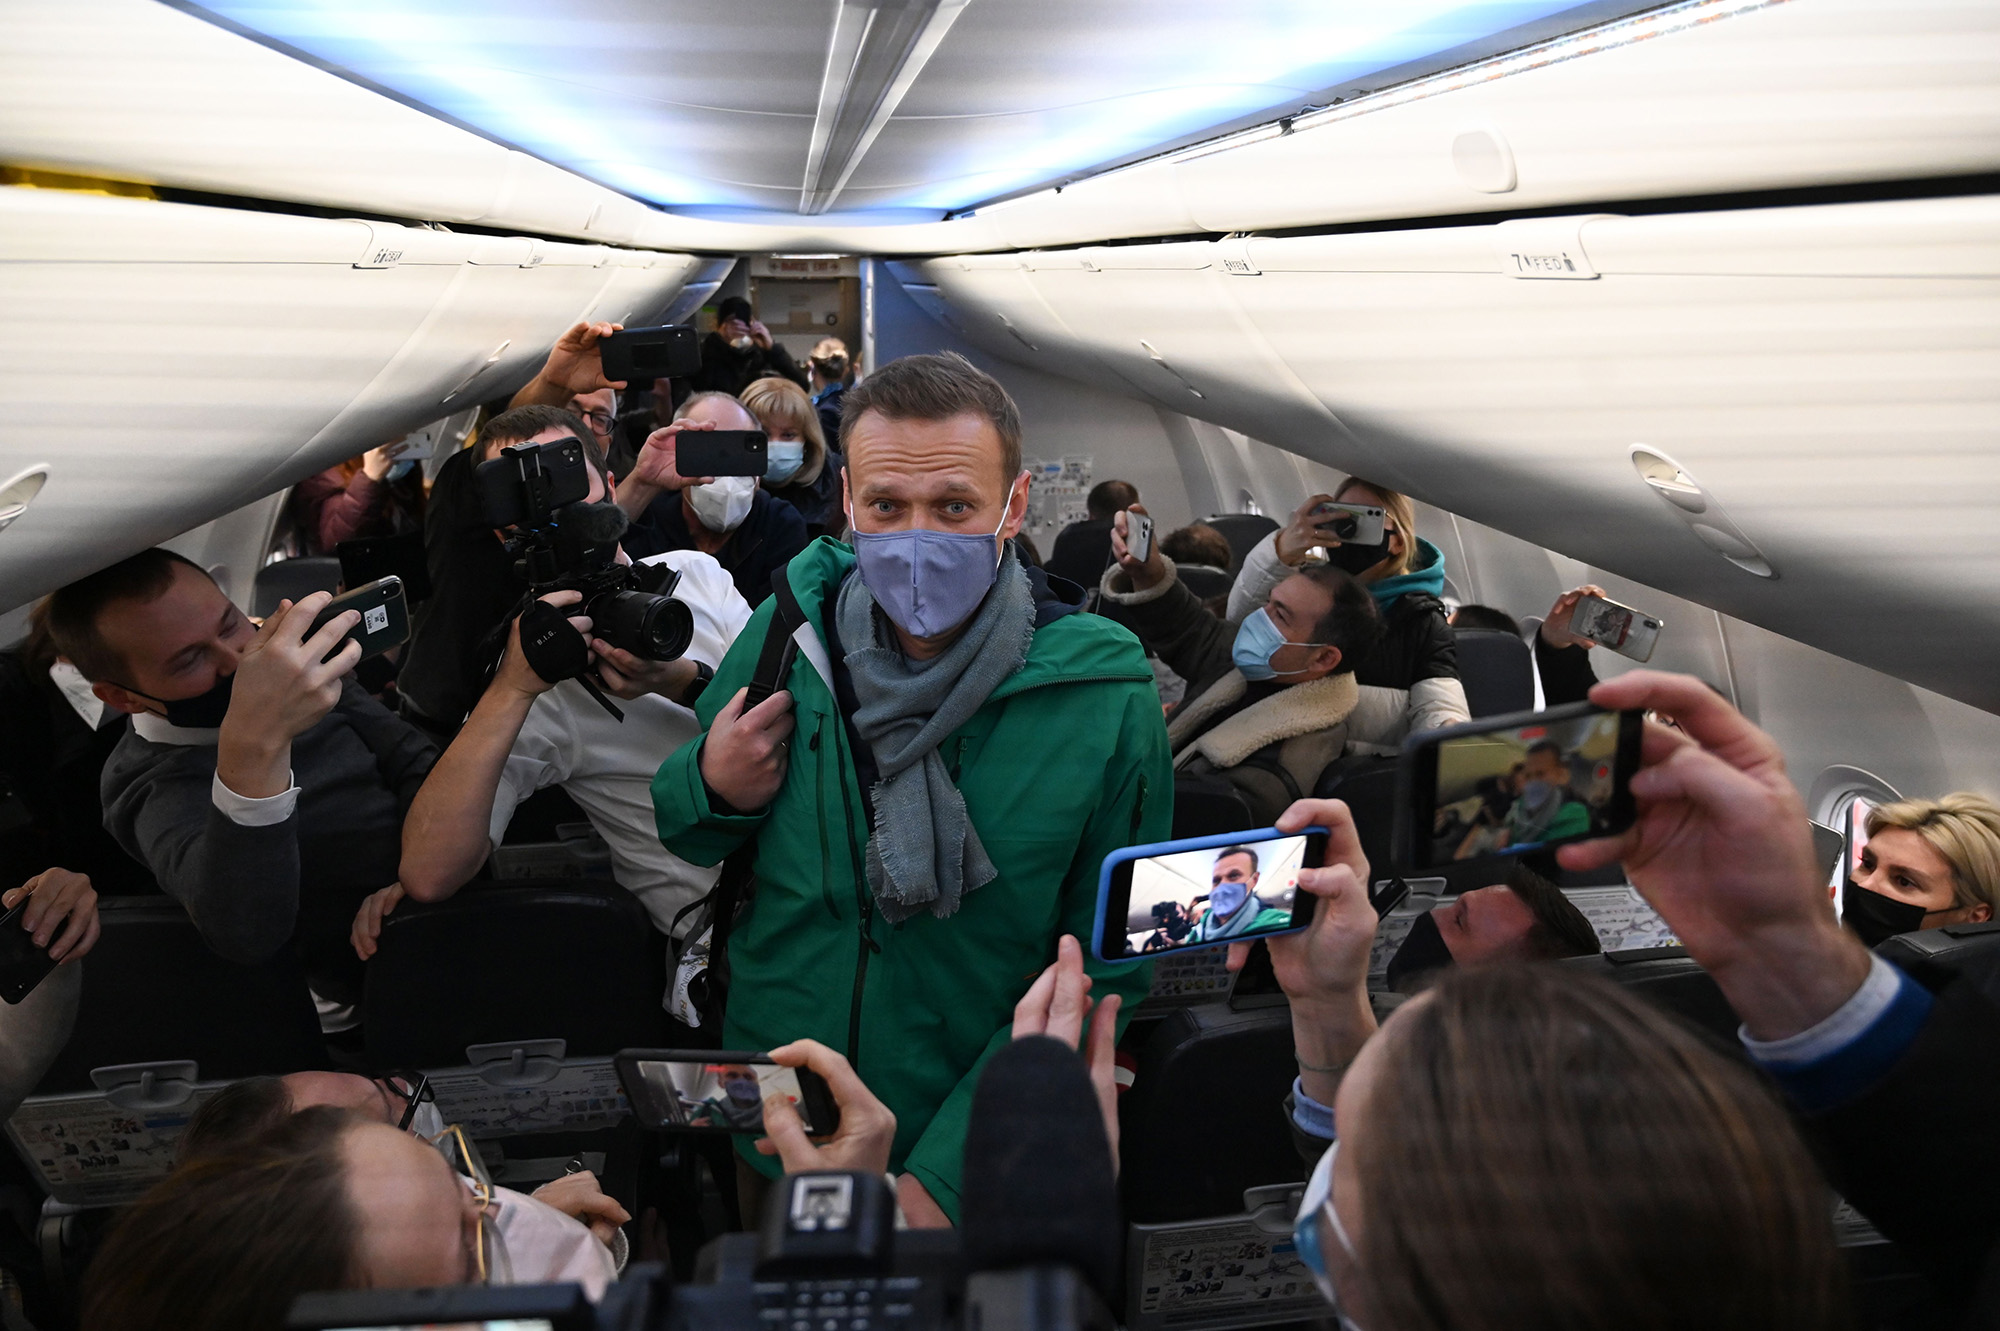 Russian opposition leader Alexey Navalny walks to take his seat in a Pobeda airlines plane heading to Moscow before take-off from Berlin Brandenburg Airport (BER) in Schoenefeld, southeast of Berlin, on January 17, 2021.